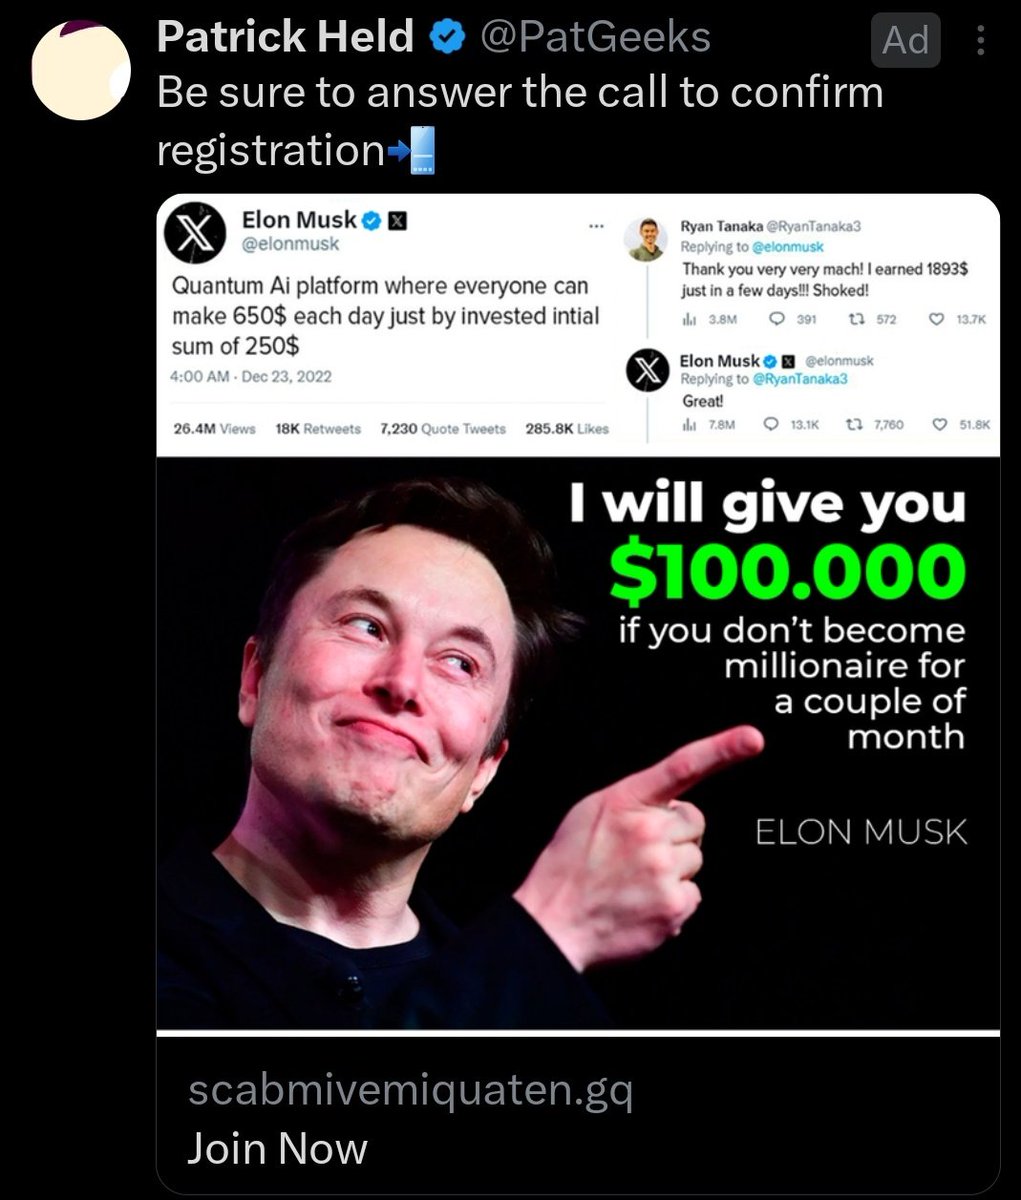 Getting the fake Elon tweets promising me money as official ads now. Starting to think the idea that forcing scammers to pay a small amount to get more visibility would kill bots and scams is wrong, and might even have the opposite effect